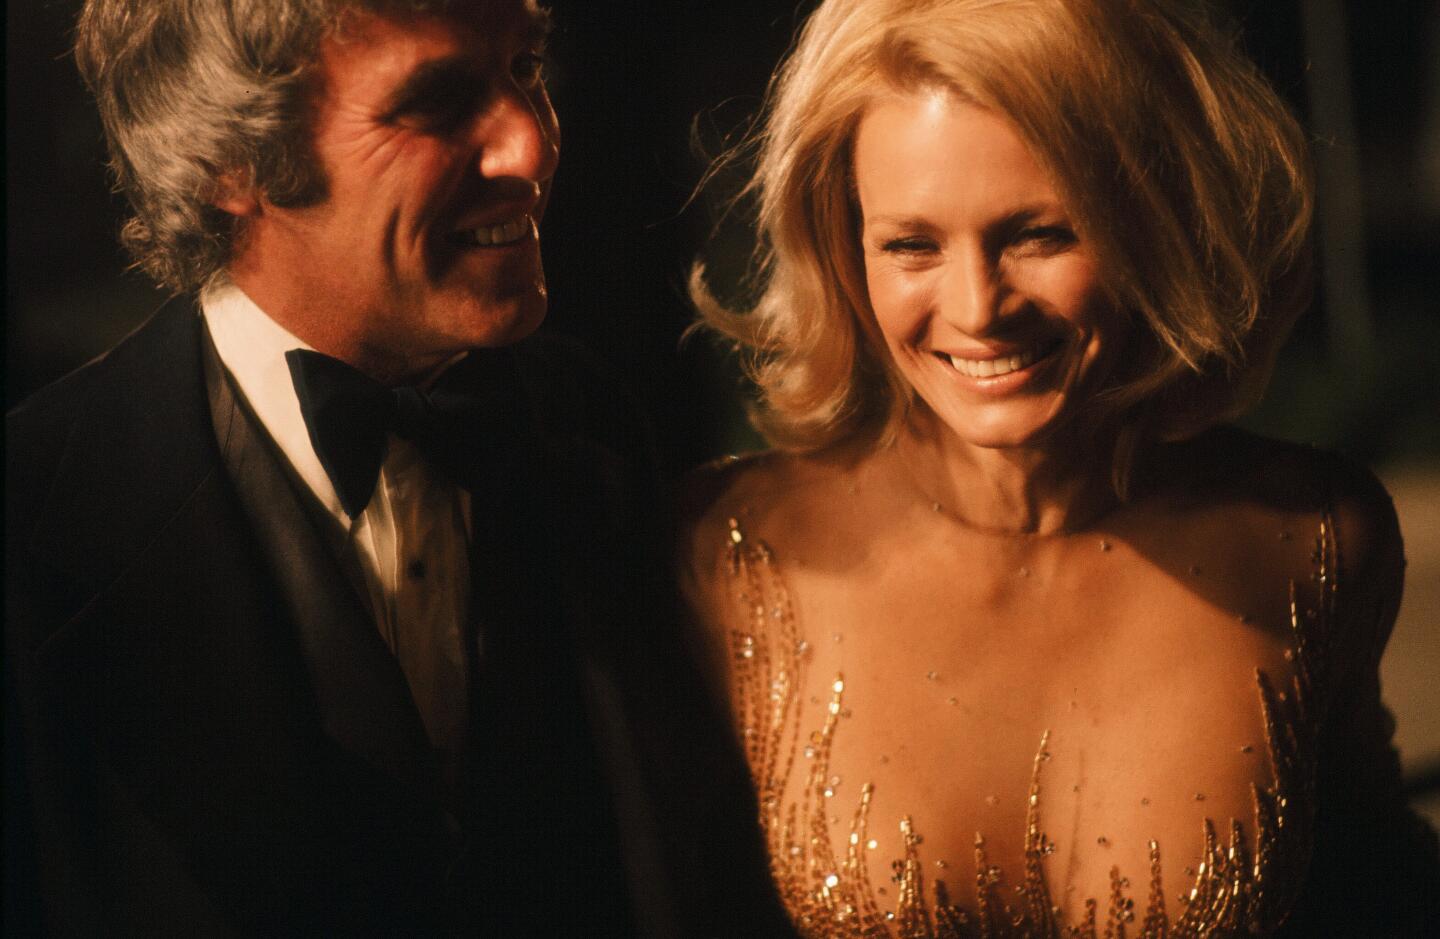 Burt Bacharach in a tuxedo and Angie Dickinson in an elegant evening gown